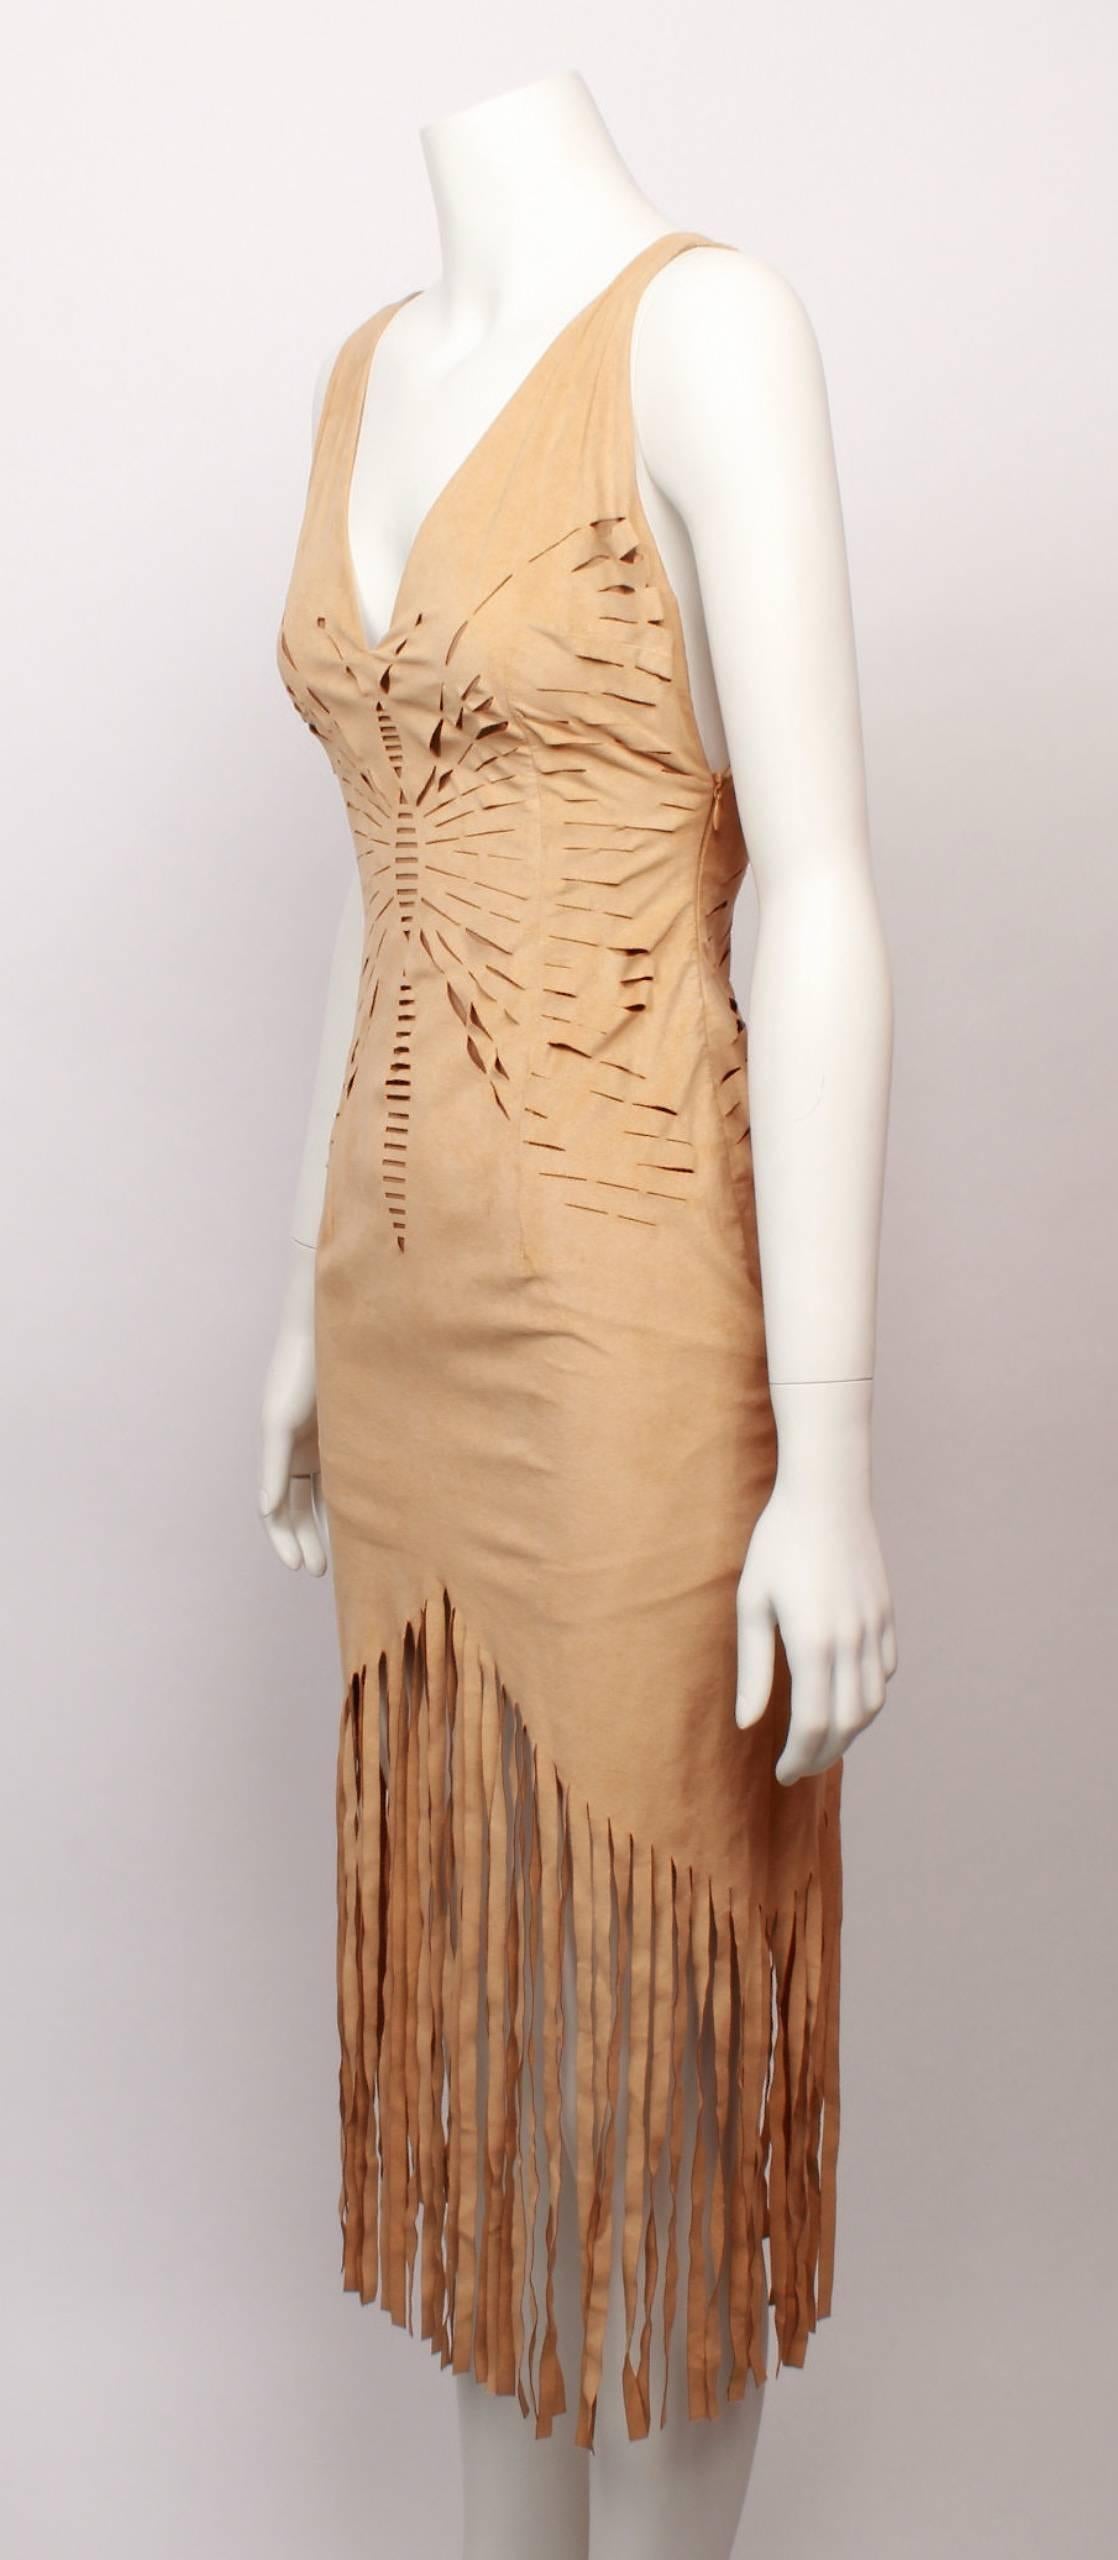 Incredible Christian Dior sleeveless beige 'Suede Look' dress features laser cutting on the front and back torso in the shape of a butterfly and dramatic fringed hemline. 
The dress is sleeveless with V shaped necklines and body con fitted